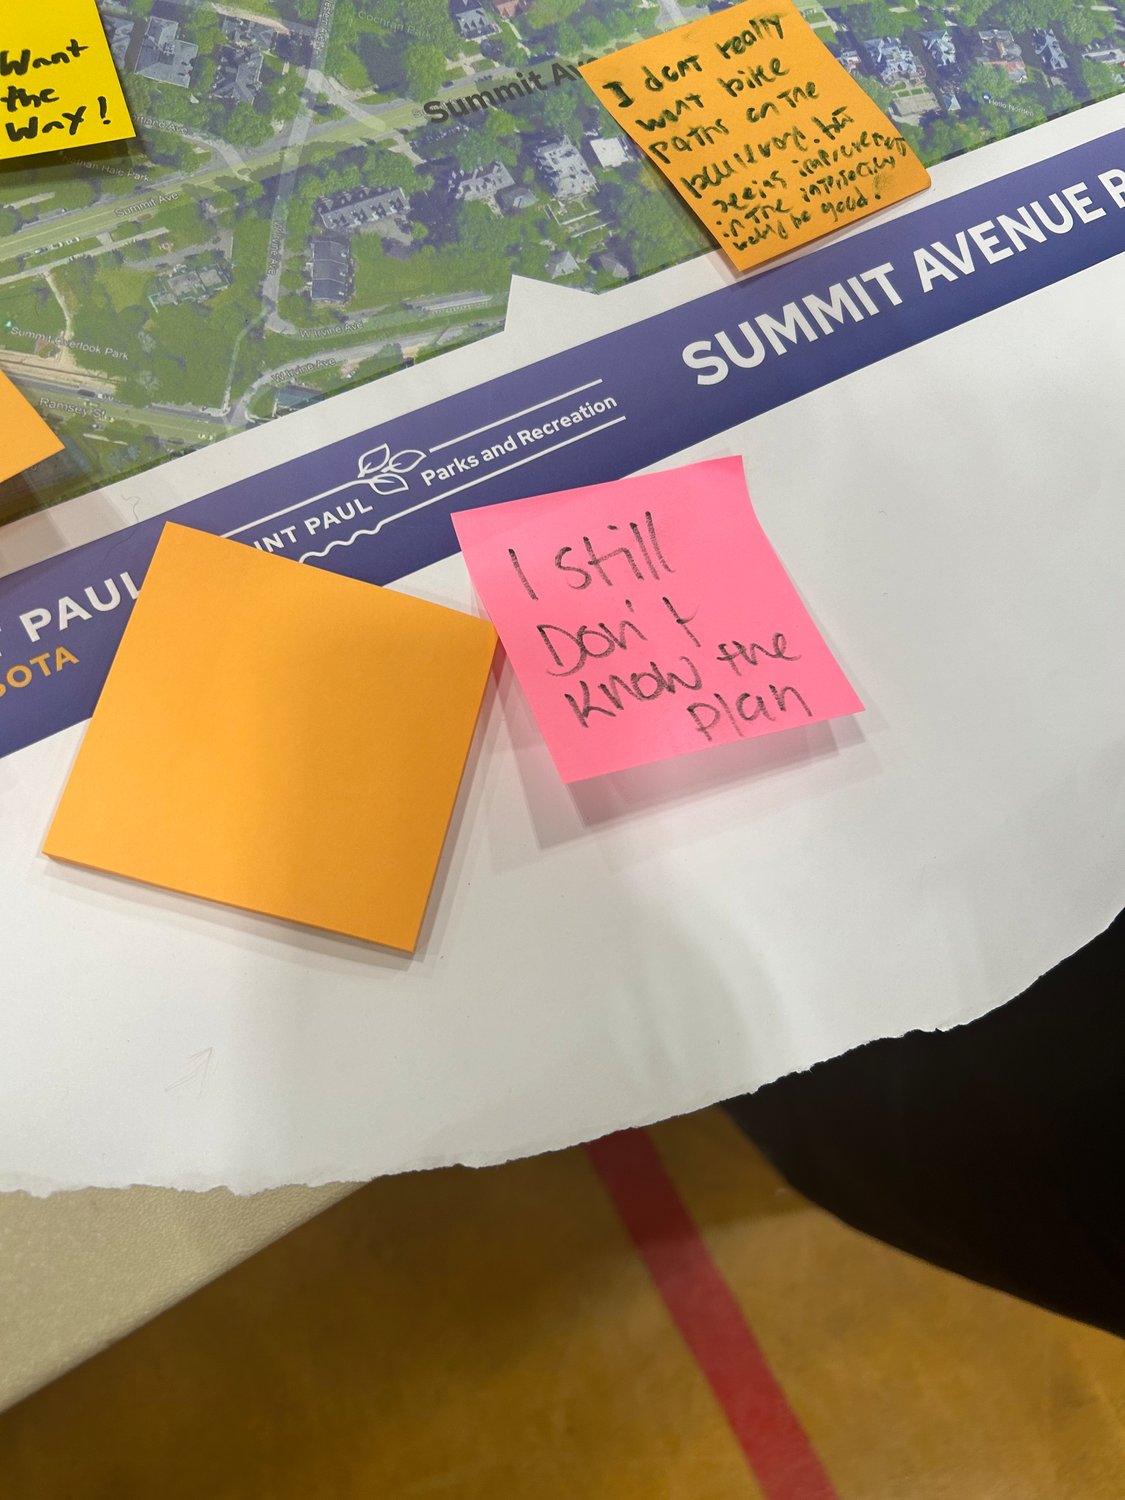 Community members could leave comments on a map pf the Summit Avenue Regional Trial map, and are concerned about tree loss, historical preservation, and the safety of the bike lanes. (Photo by Chloe Peter)